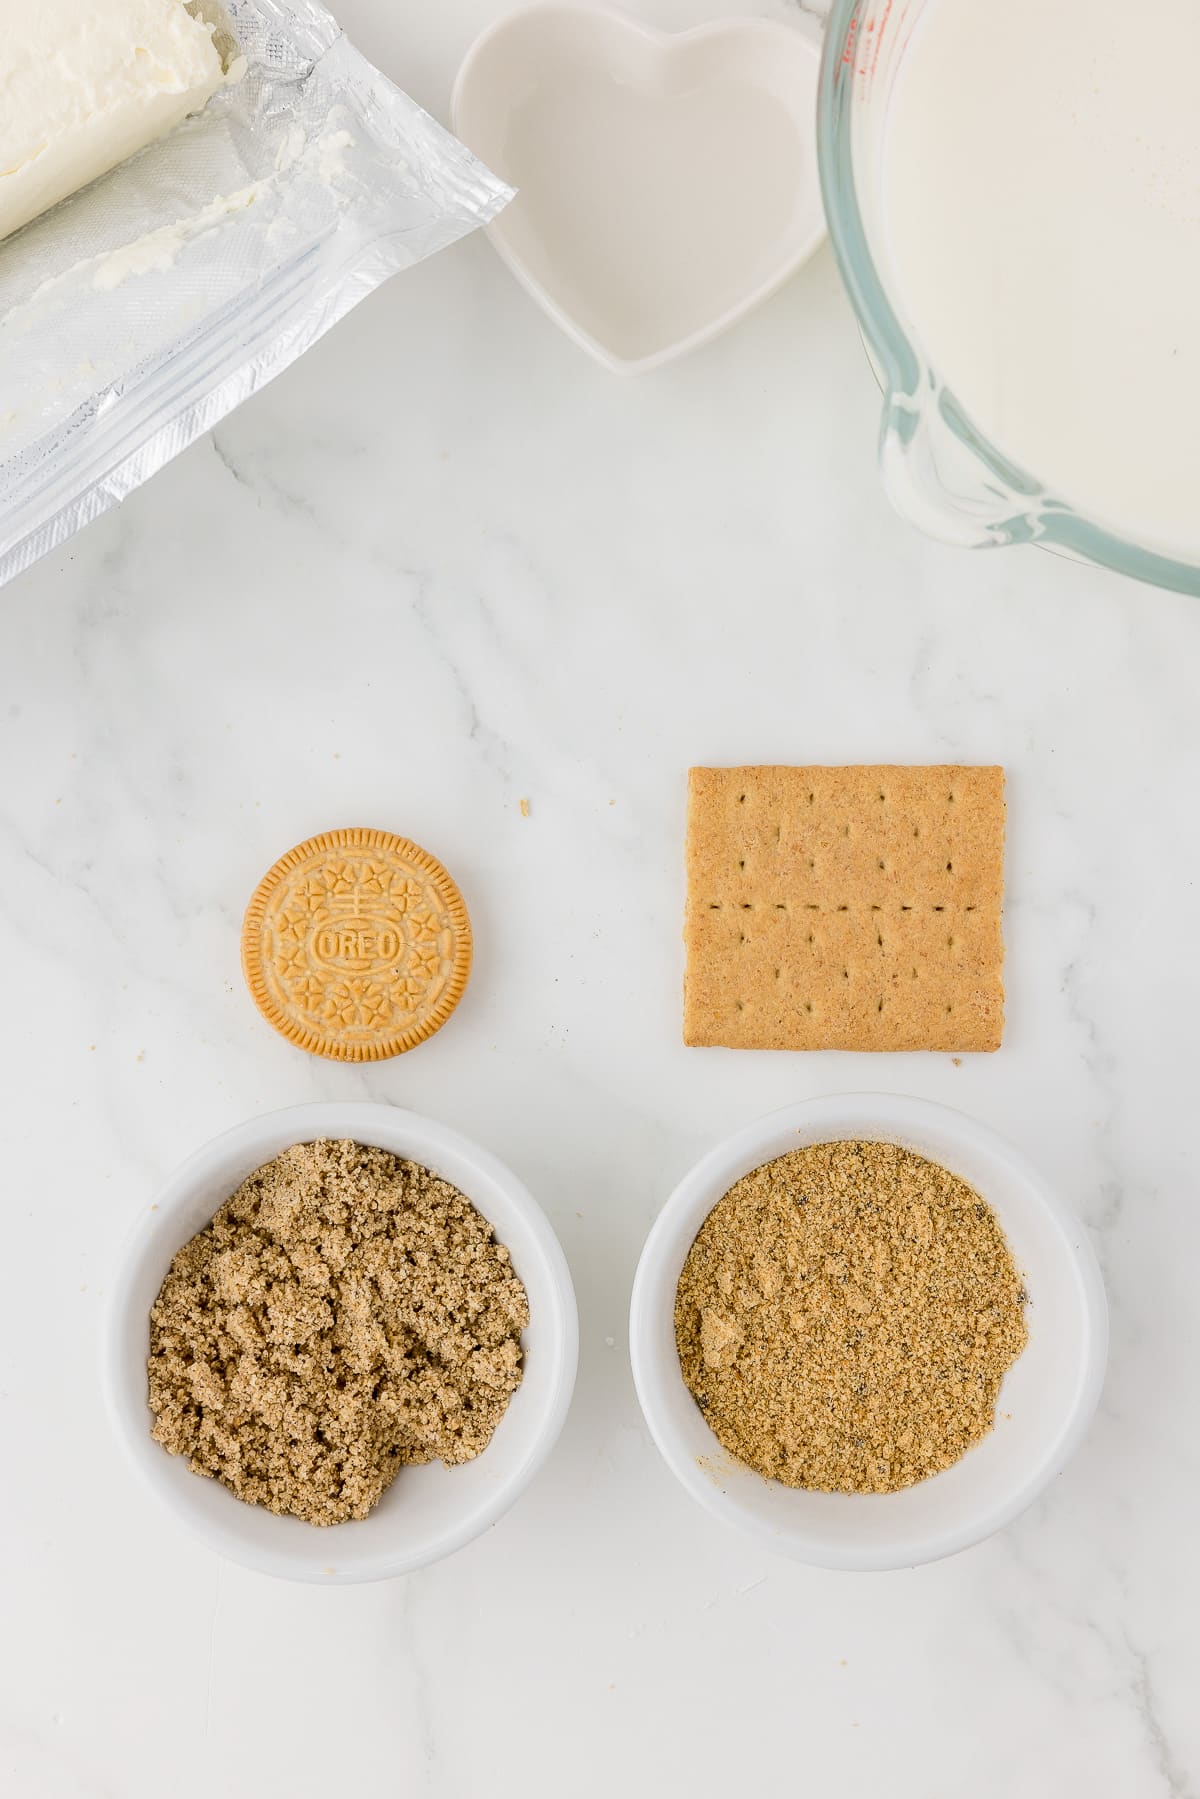 a bowl of crumbed golden oreo cookie and a bowl of crumbled graham cracker on a white marble counter.